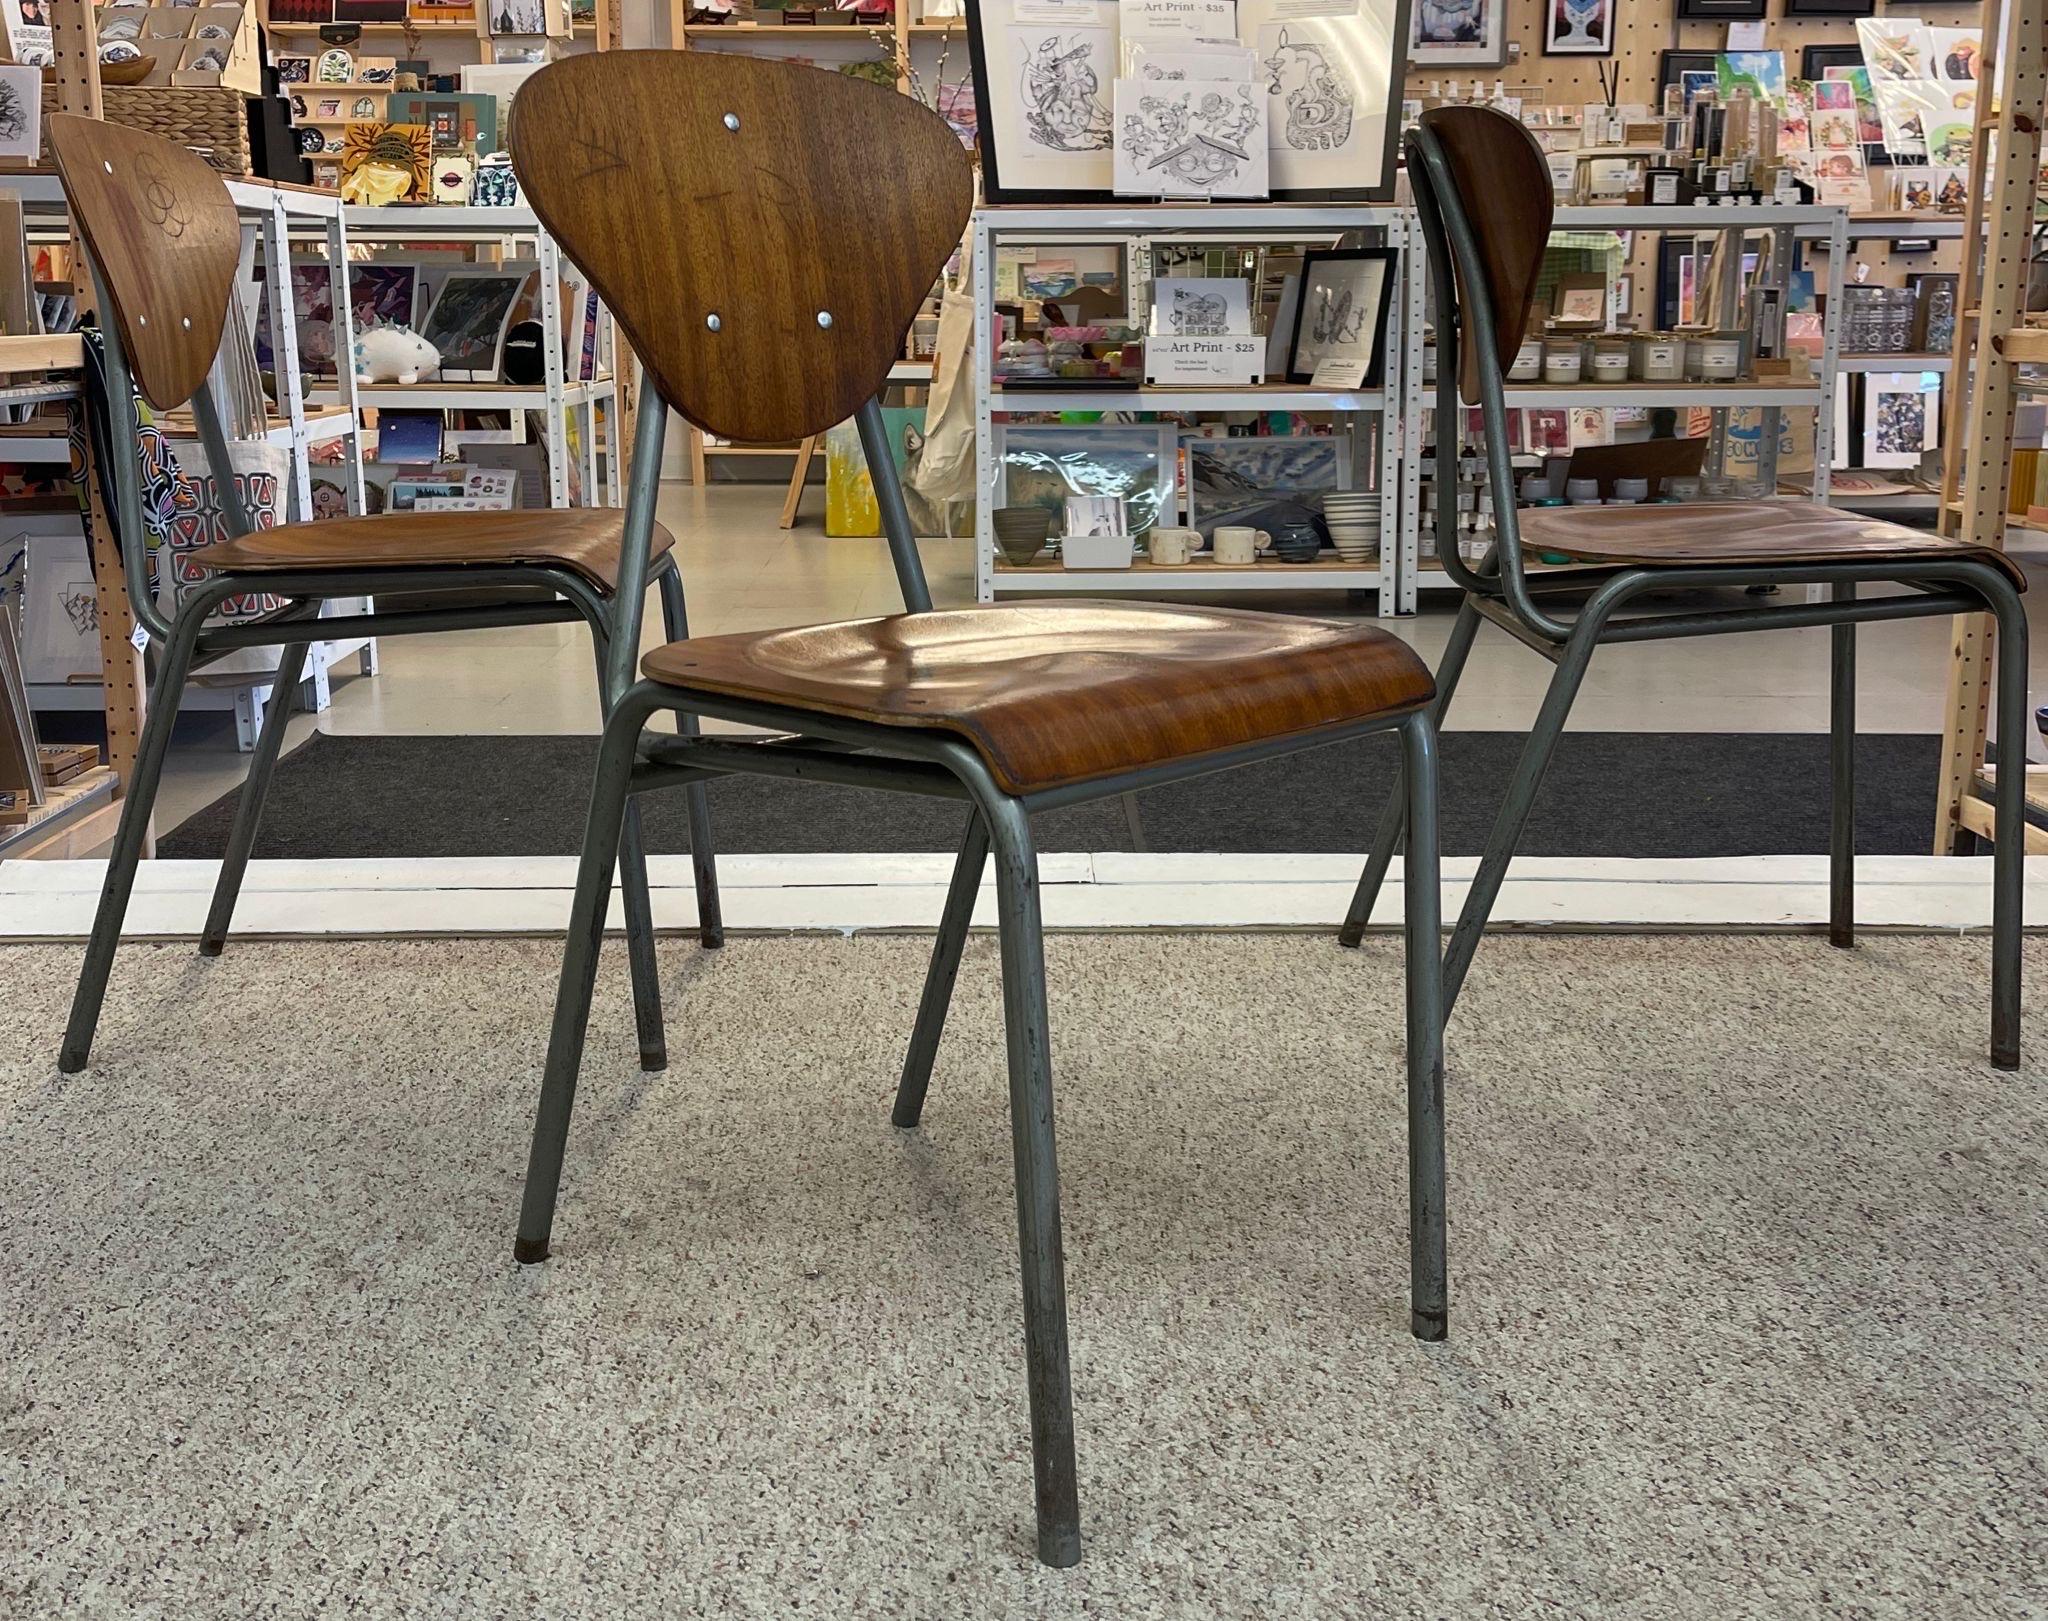 Wood Vintage Danish Modern Chairs With Metal Frame. Set of 4. For Sale